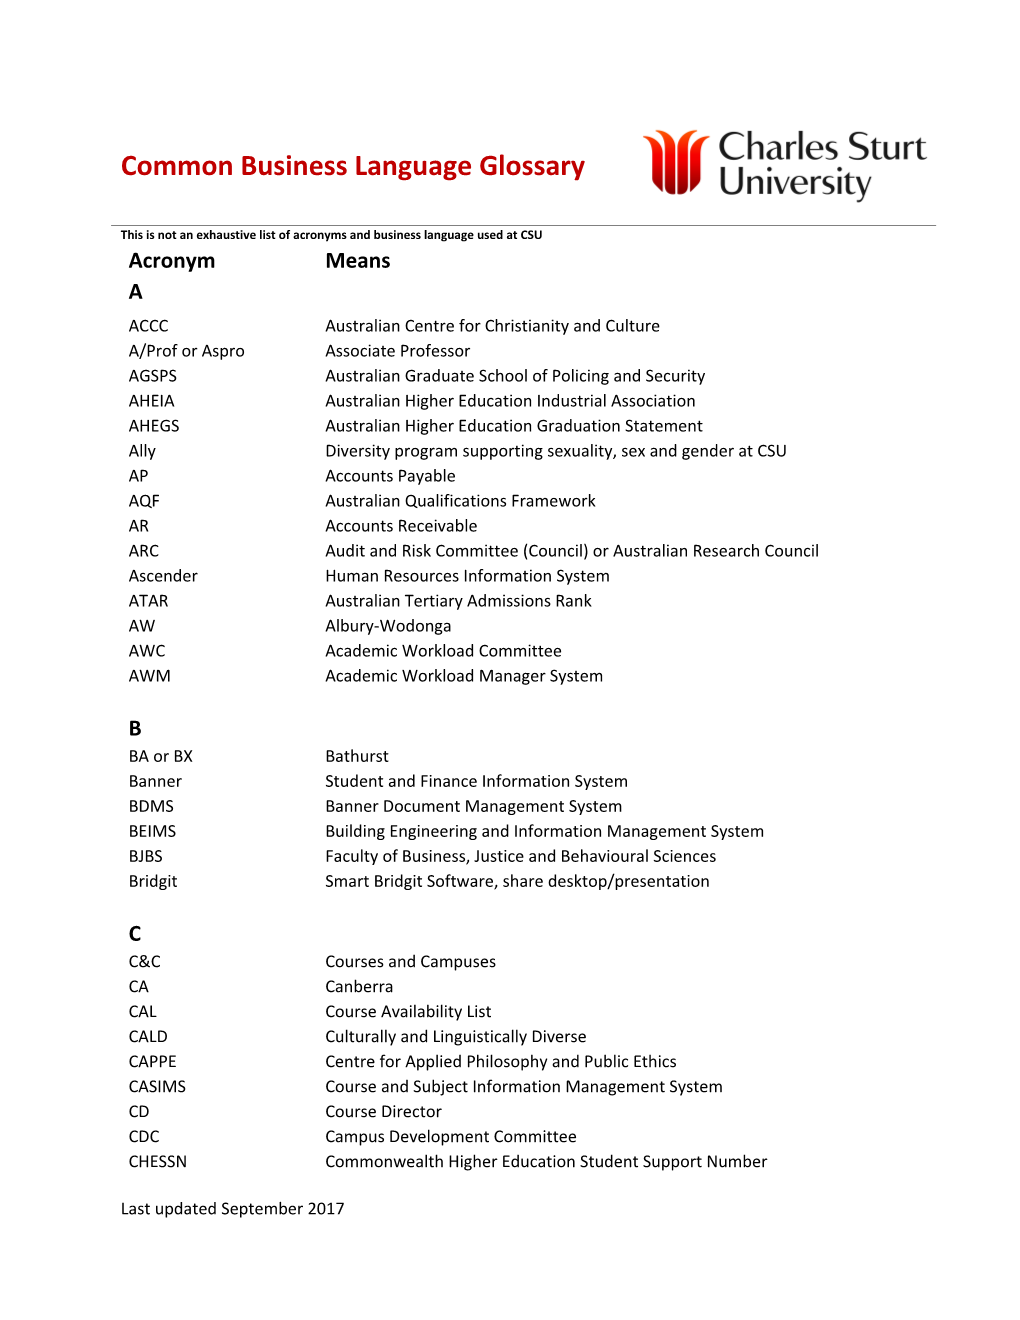 This Is Not an Exhaustive List of Acronyms and Business Language Used at CSU